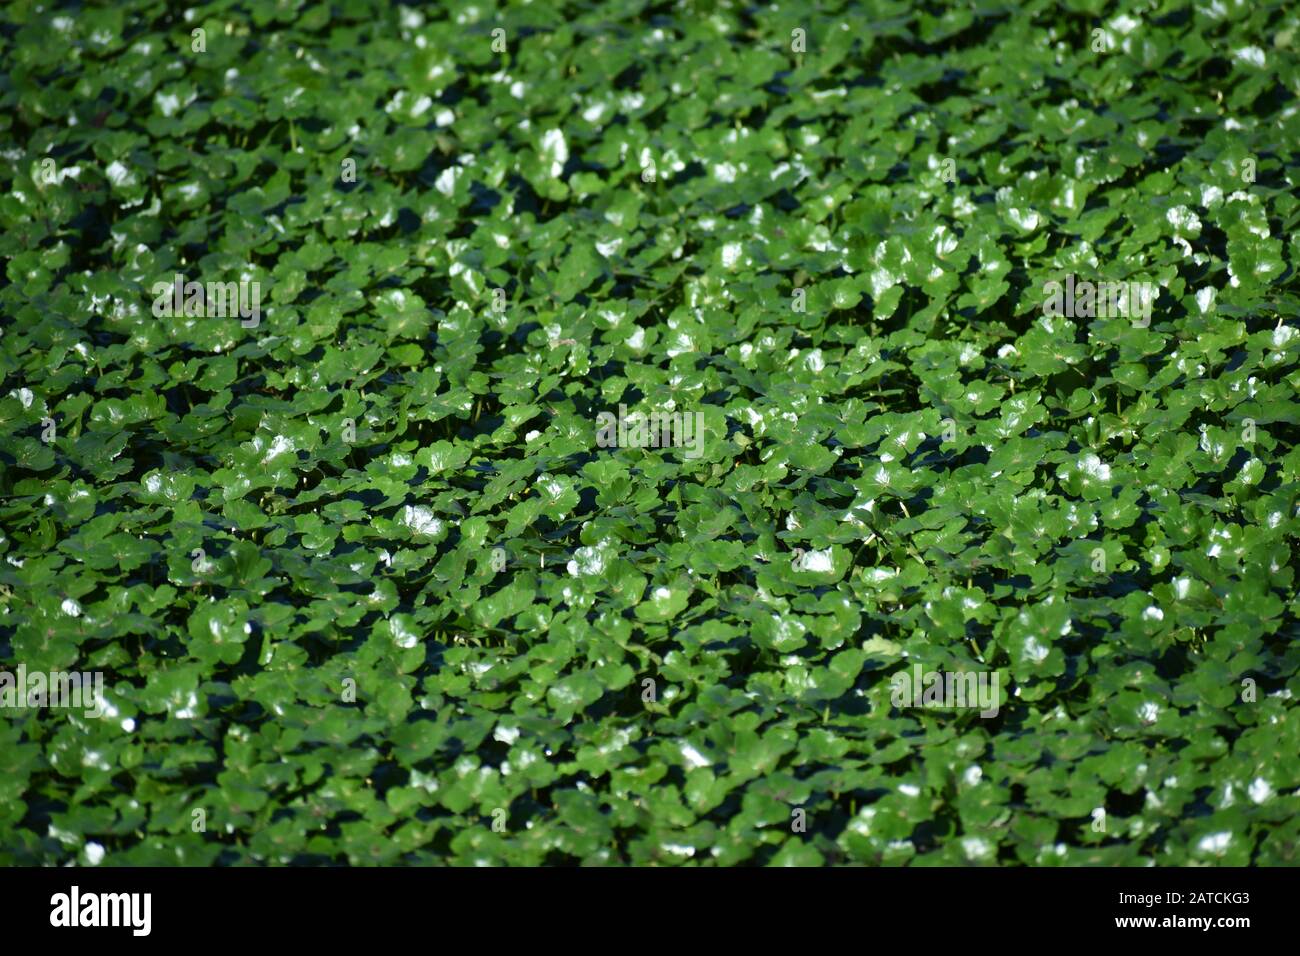 n unbroken green layer of floating pennywort (Hydrocotyle ranunculoides), a green water plant, on the surface of a small pool near Watsonville Slough, Stock Photo